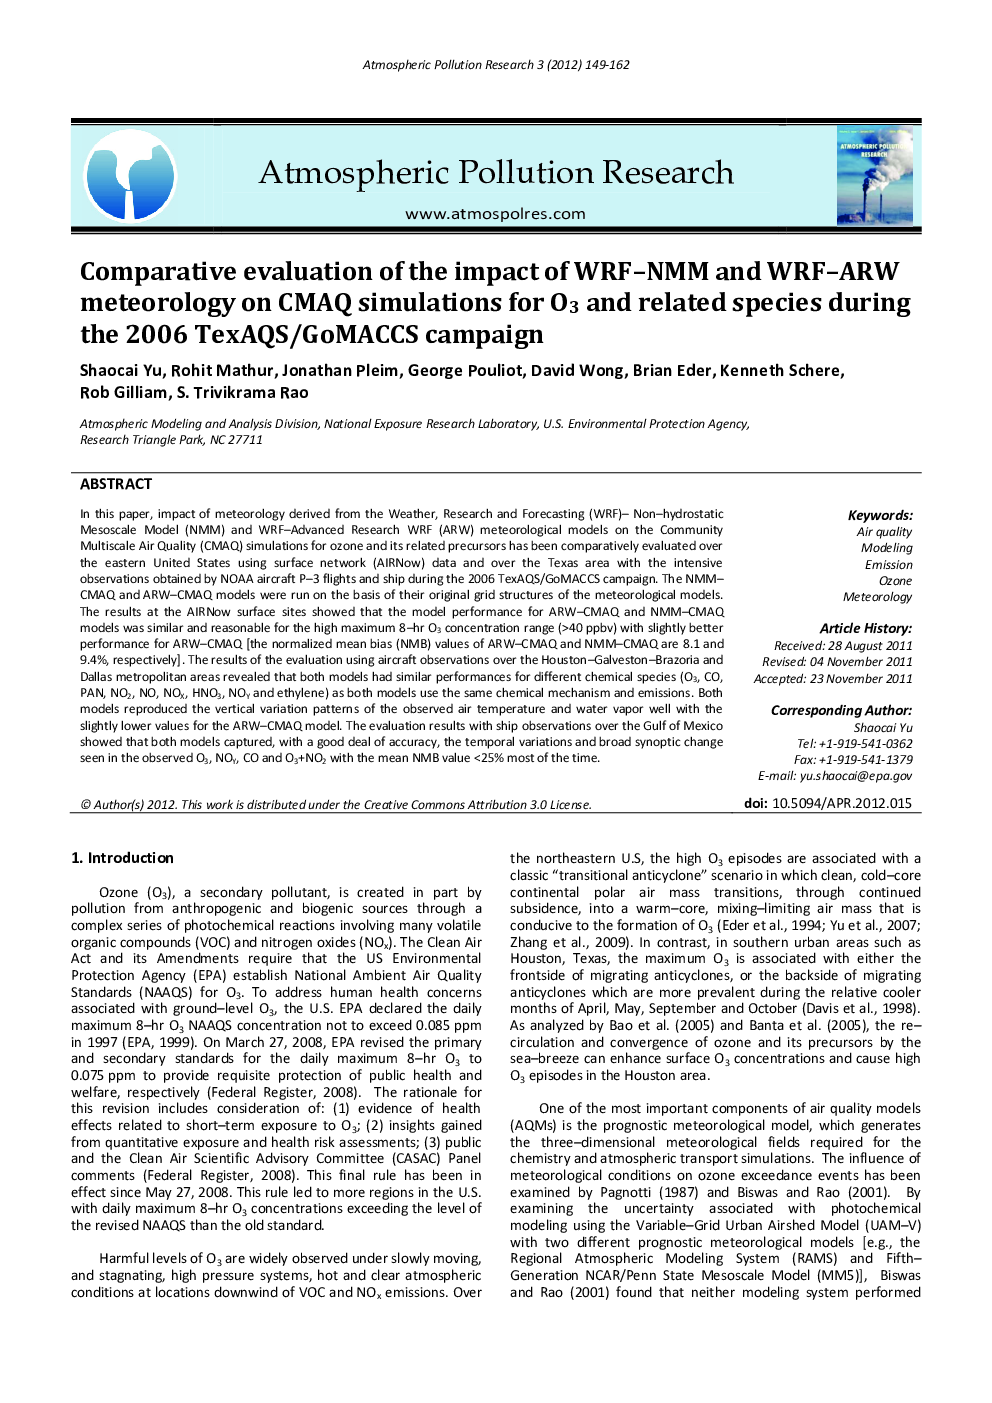 Comparative evaluation of the impact of WRF–NMM and WRF–ARW meteorology on CMAQ simulations for O3 and related species during the 2006 TexAQS/GoMACCS campaign